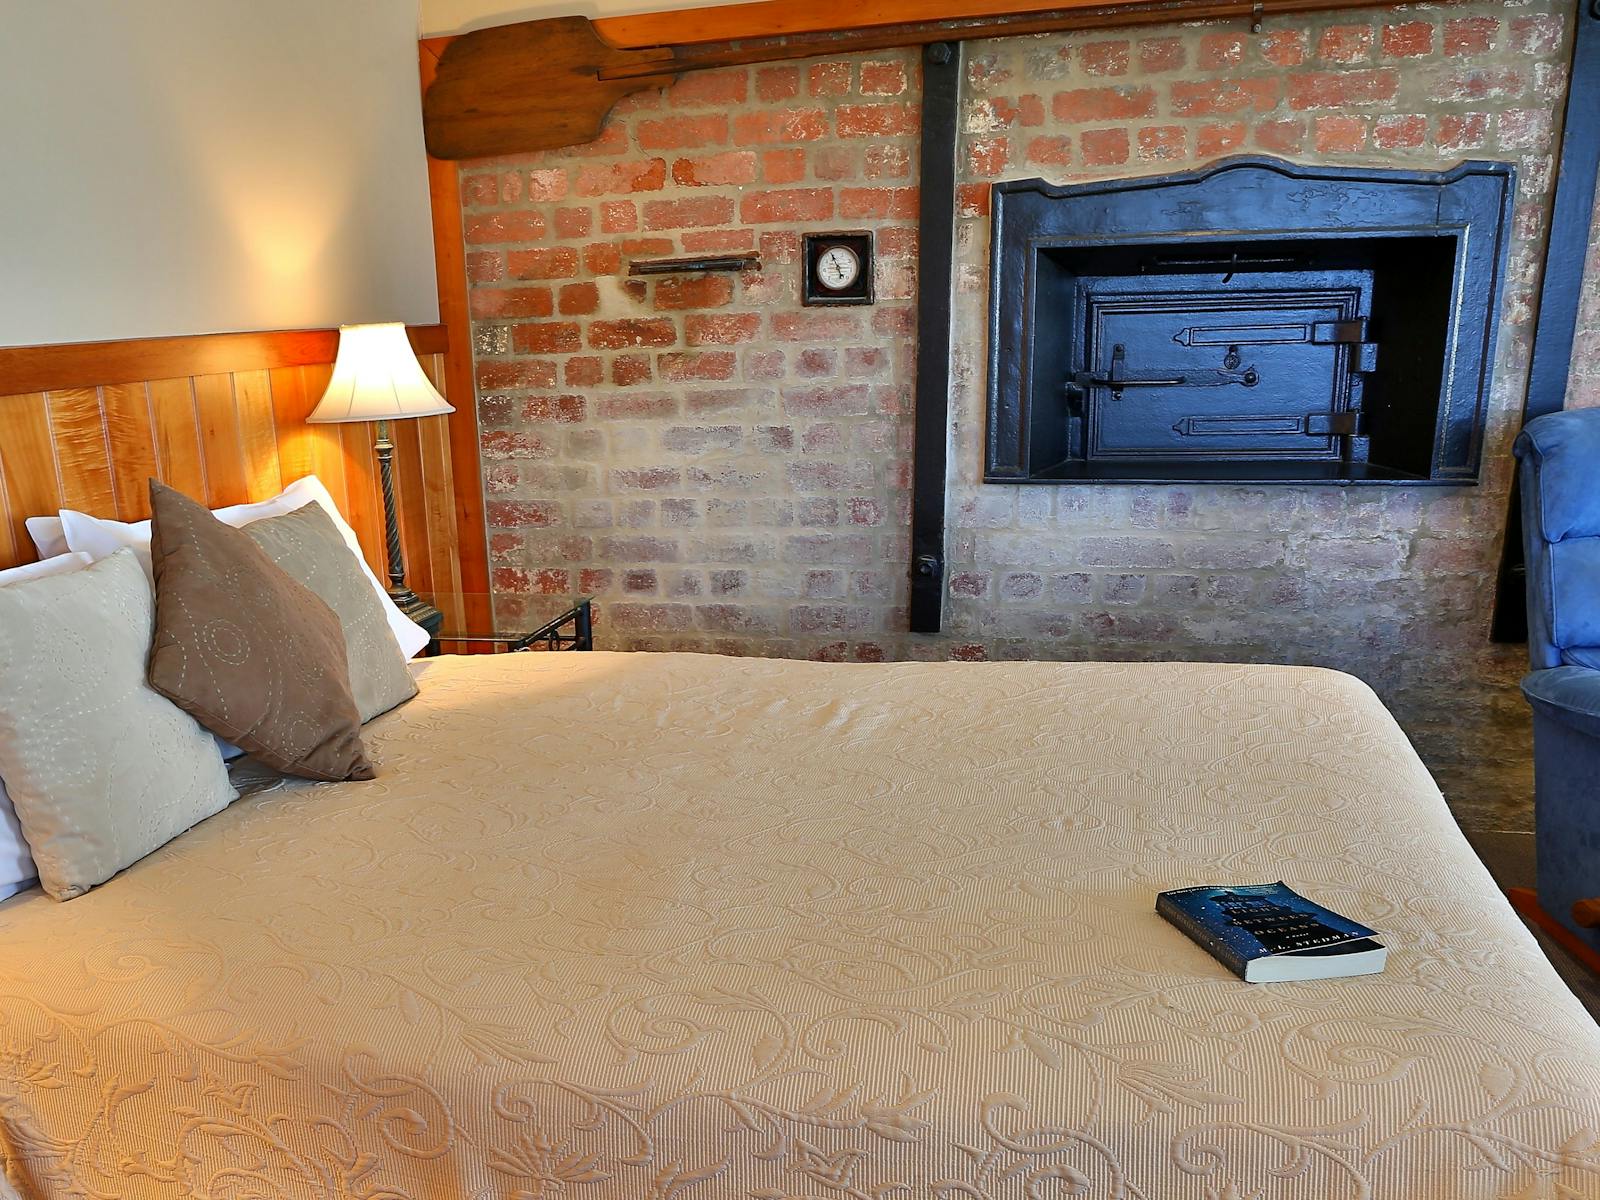 The original brick oven on display in the living area, queen bed, comfortable seating